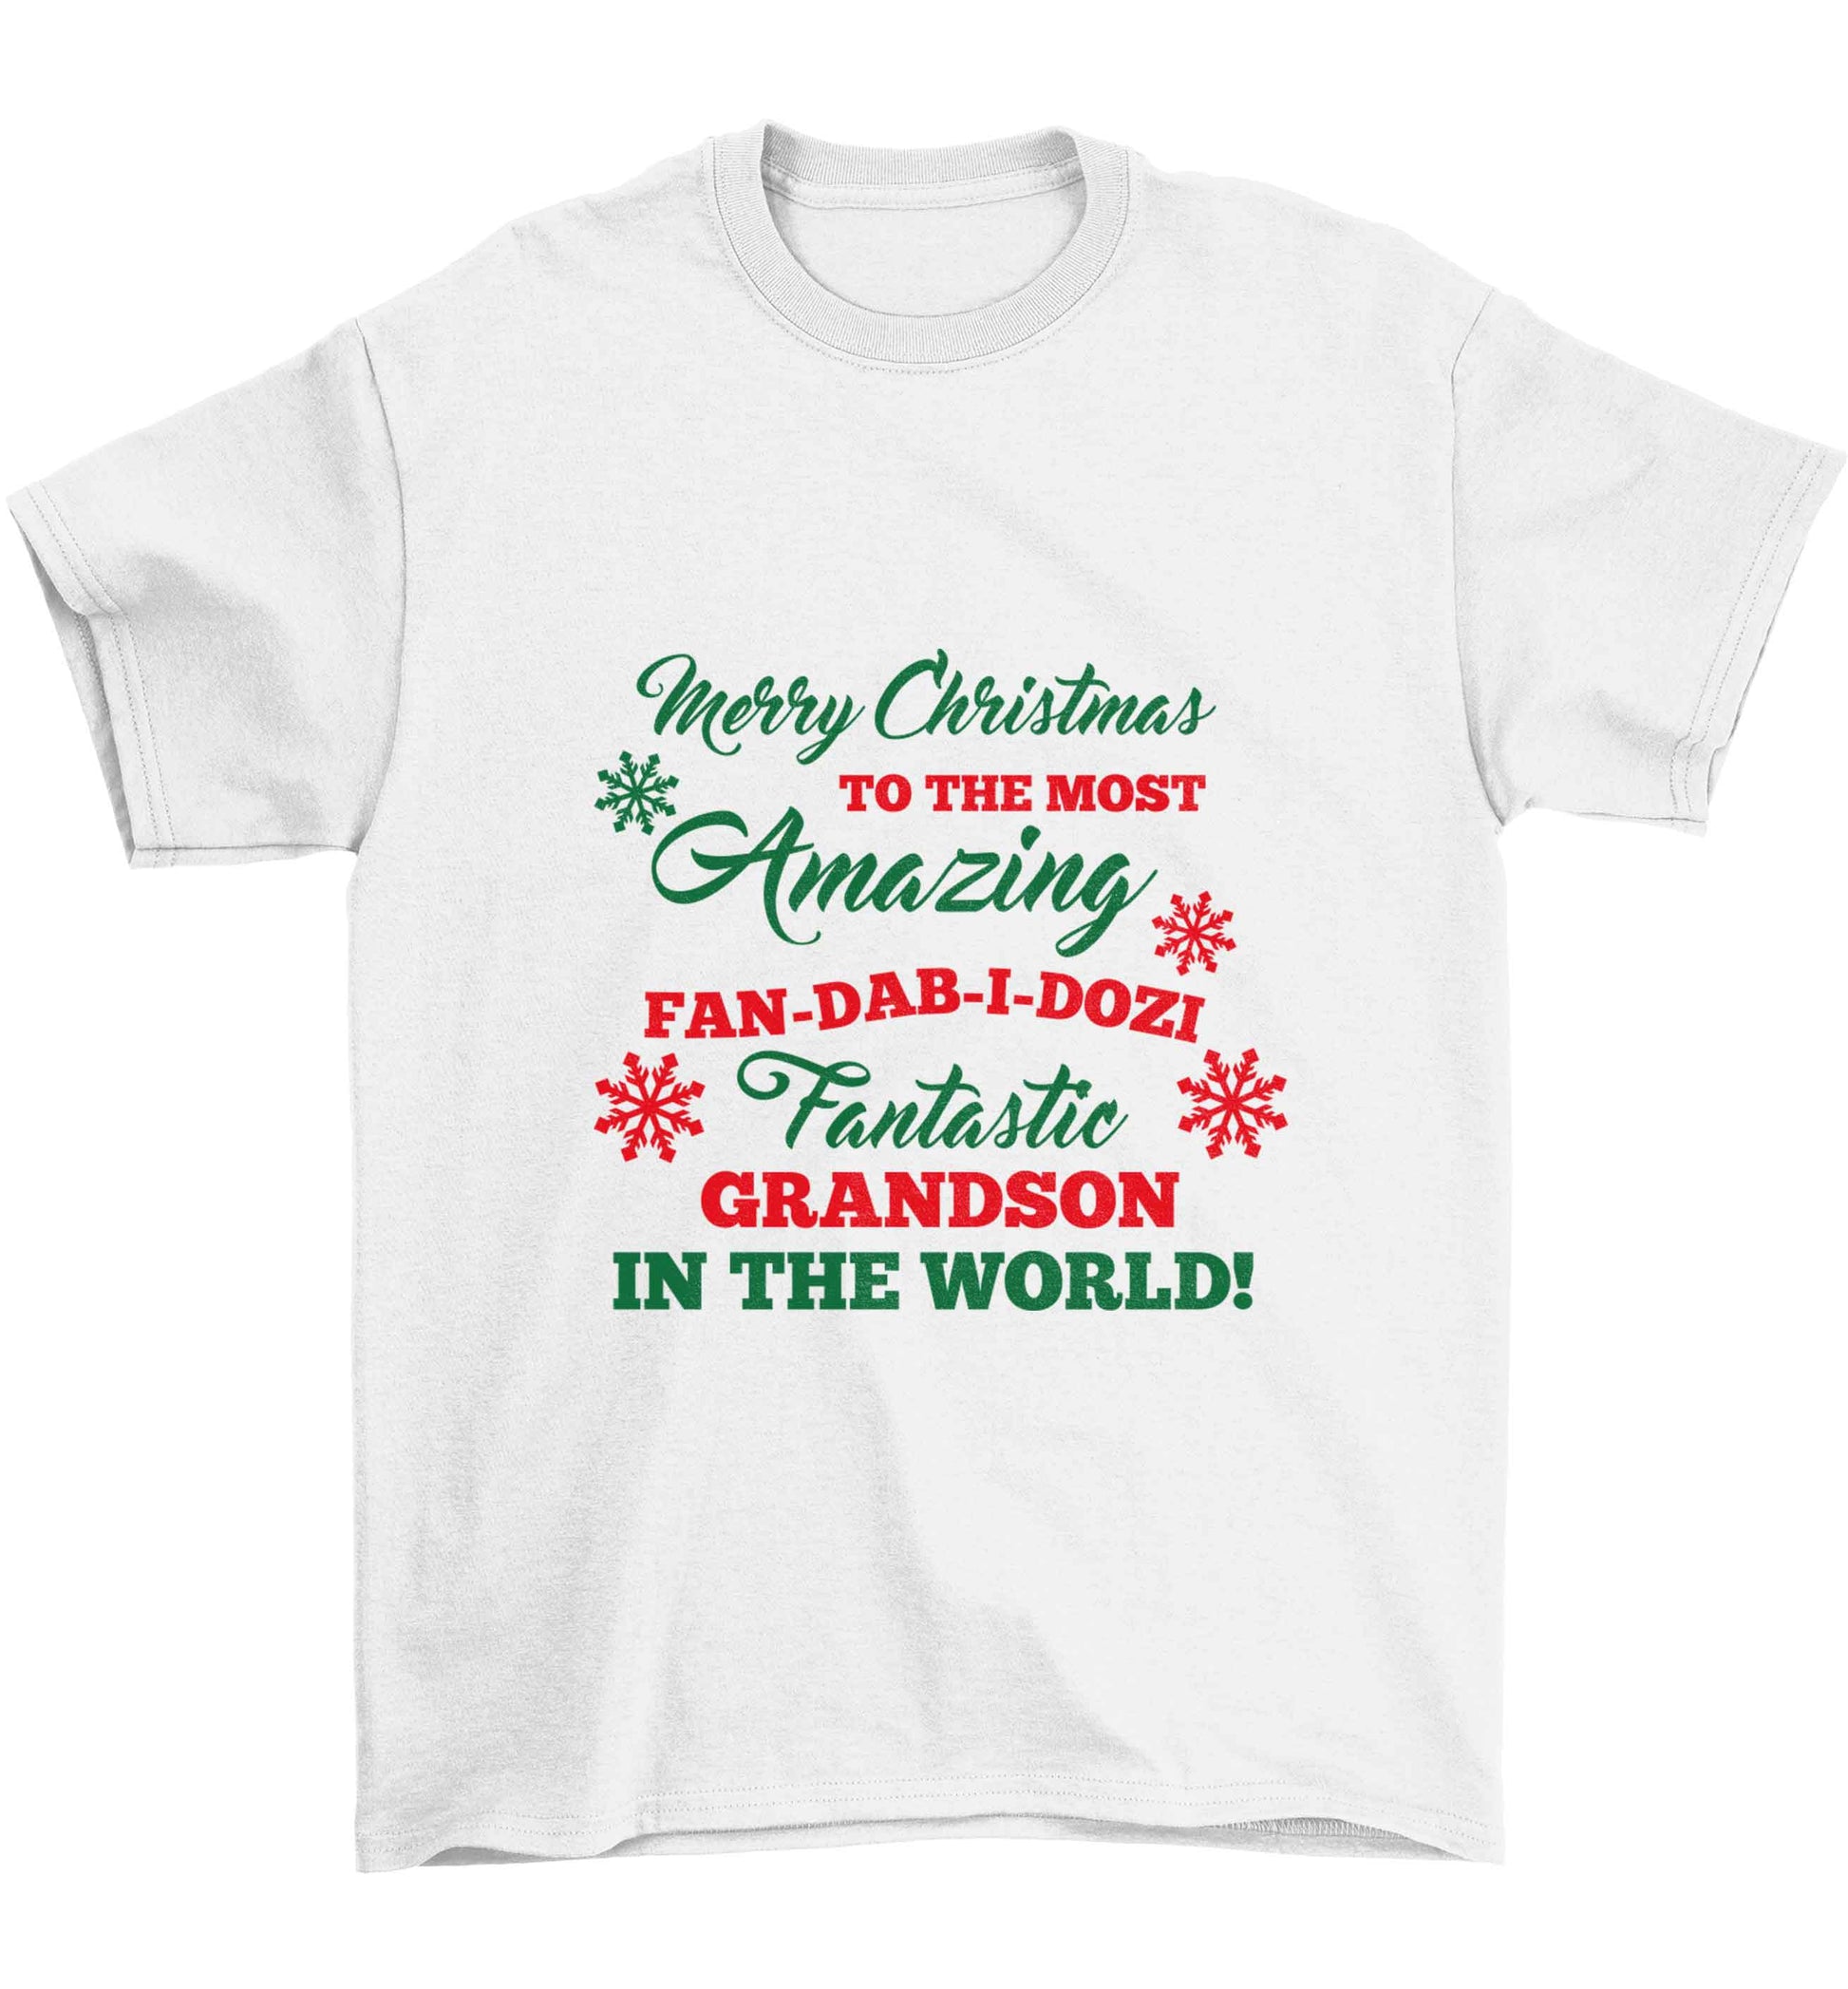 Merry Christmas to the most amazing fan-dab-i-dozi fantasic Grandson in the world Children's white Tshirt 12-13 Years